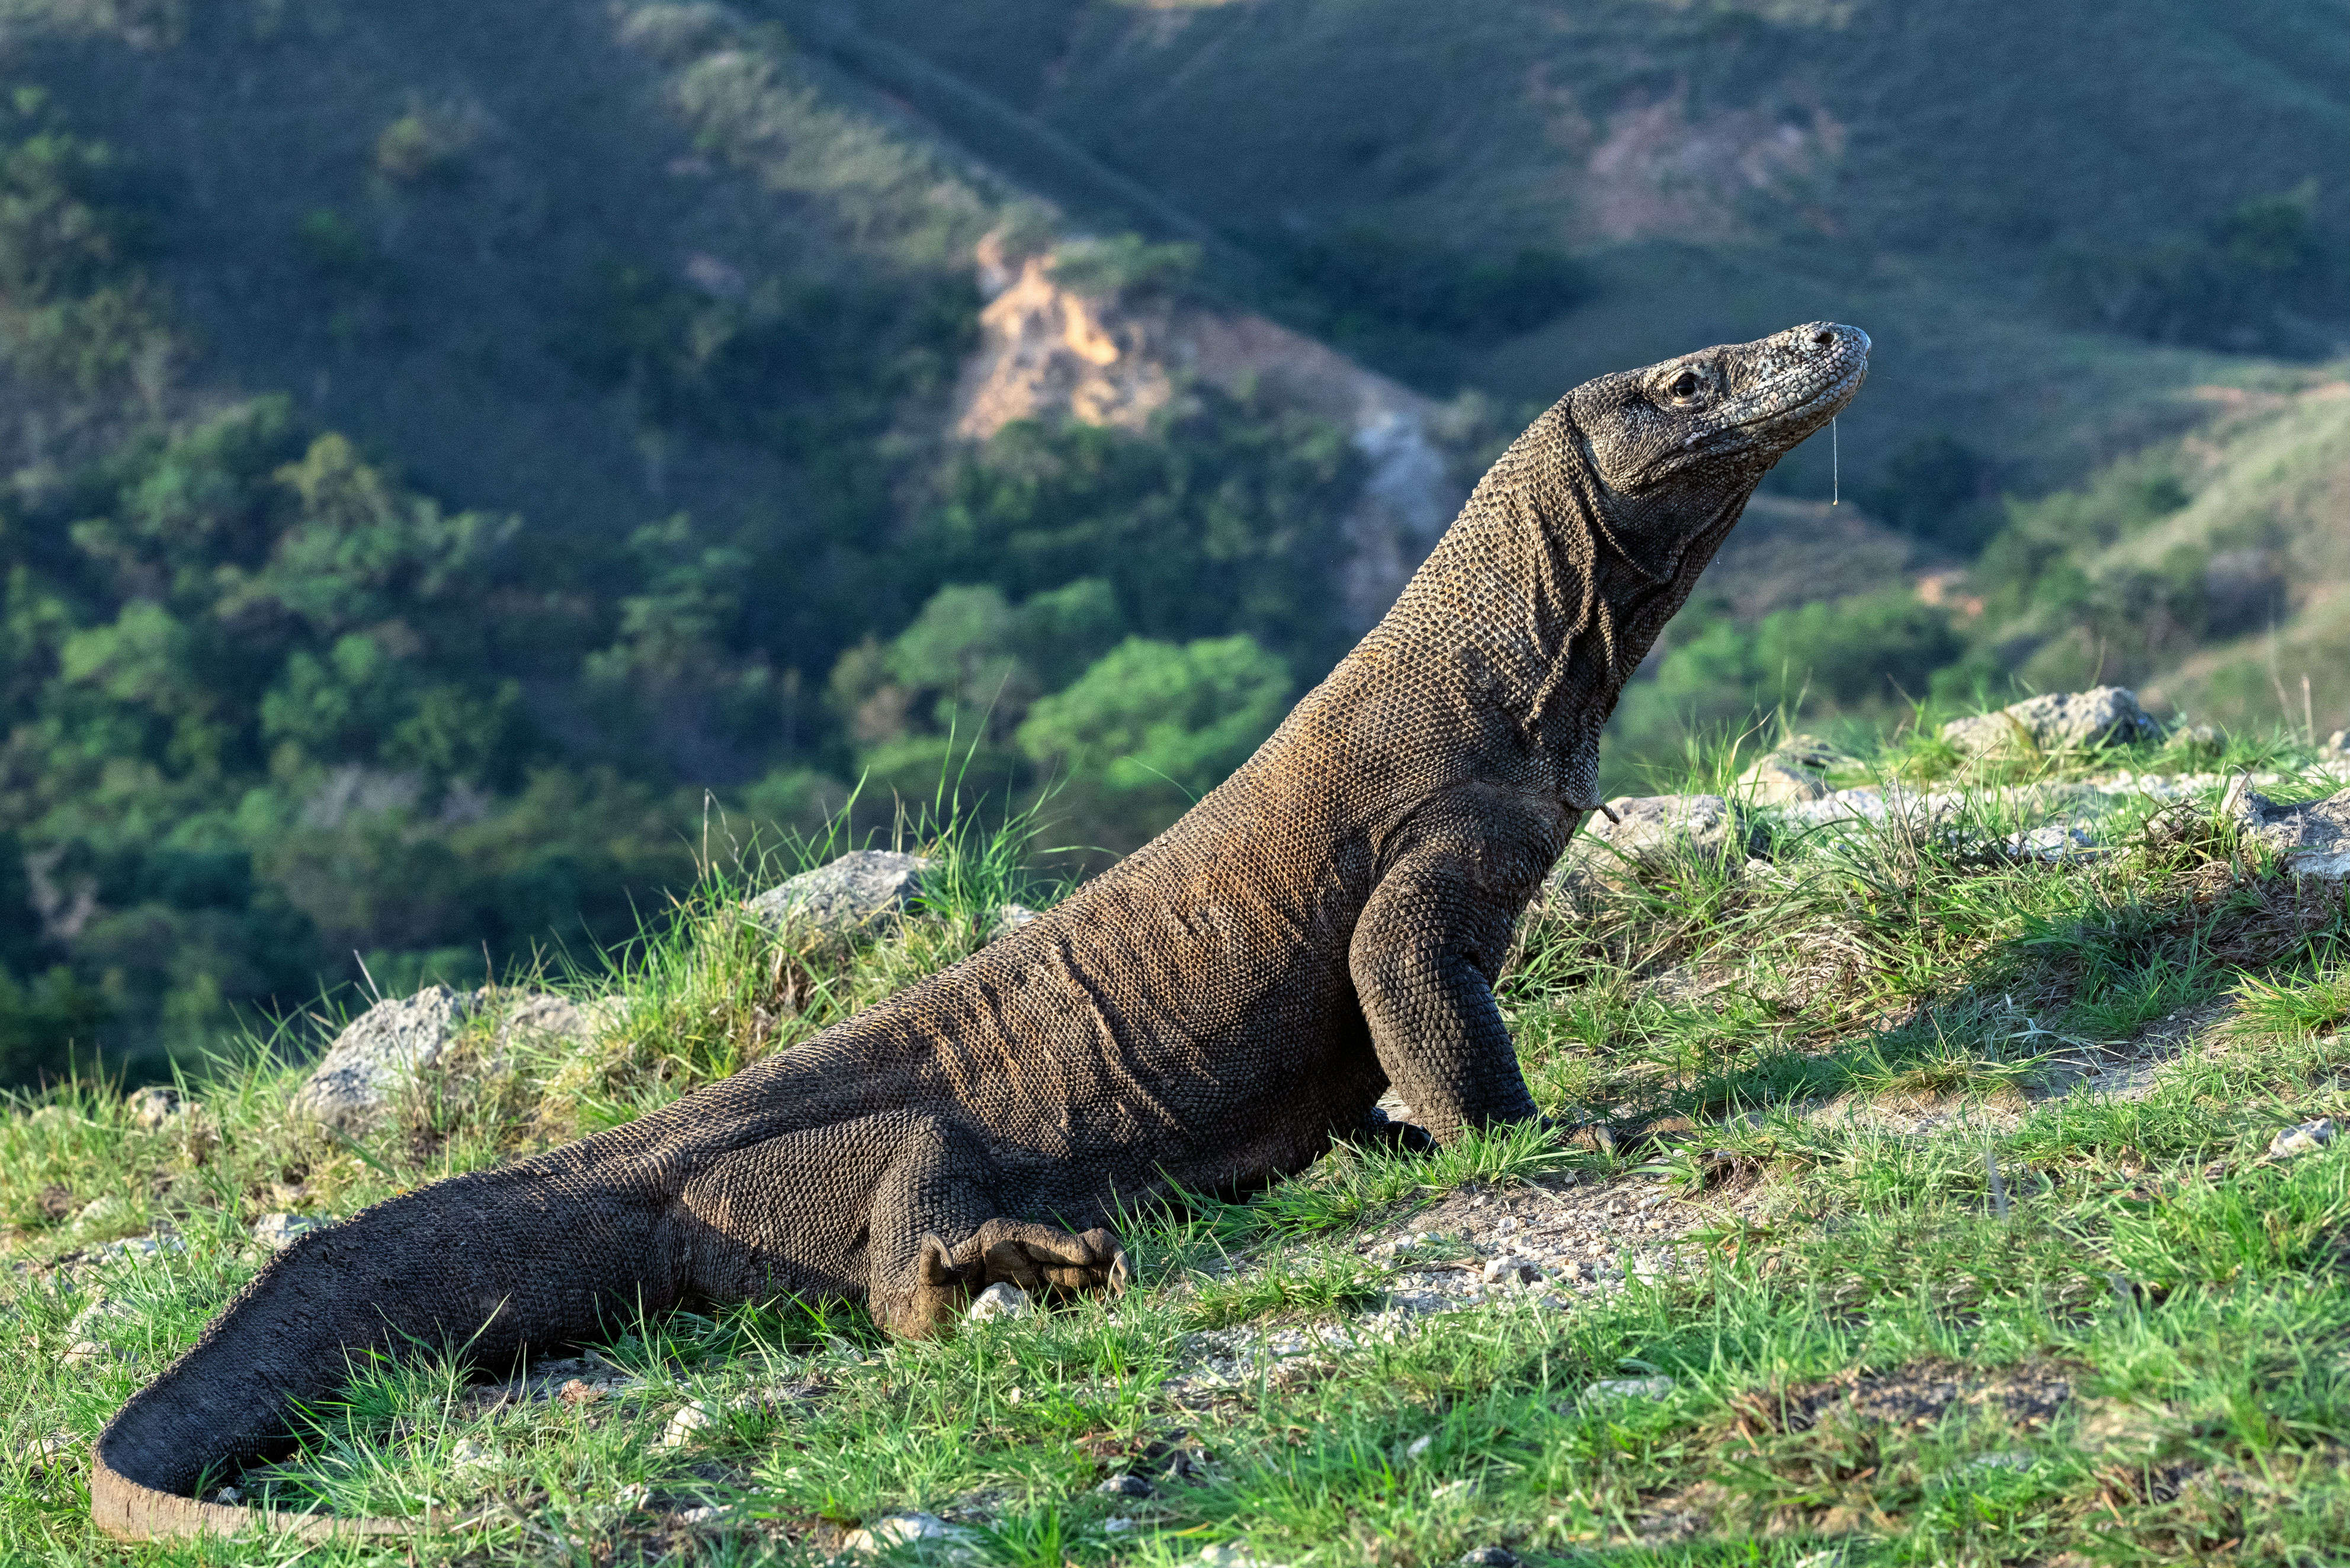 Visit The Beauty Of Eastern Indonesia - Komodo Island Tour ...